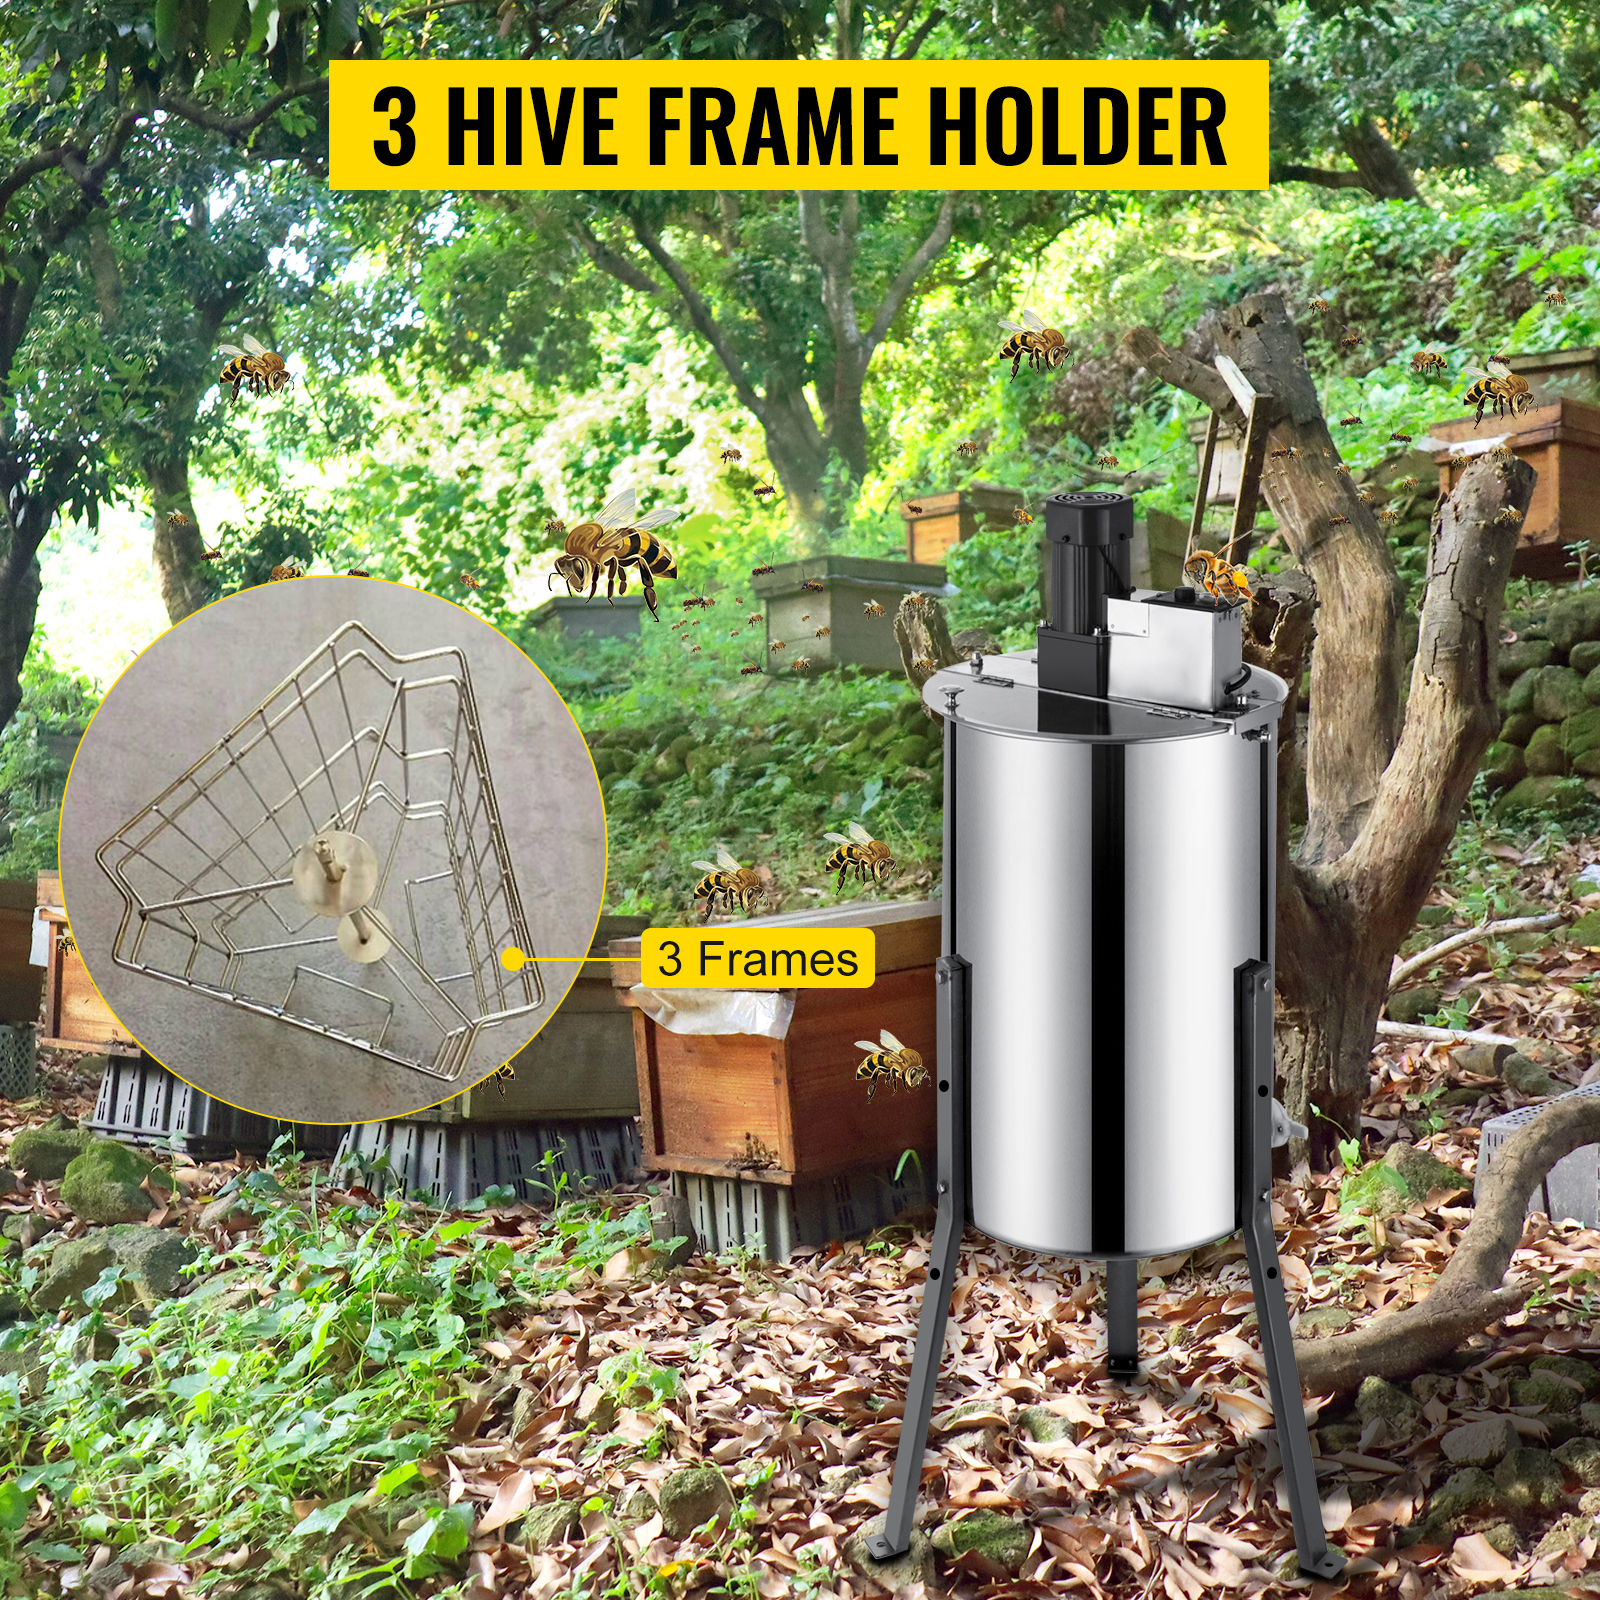 3 Frame,Stainless Steel,Electric Honey Extractor